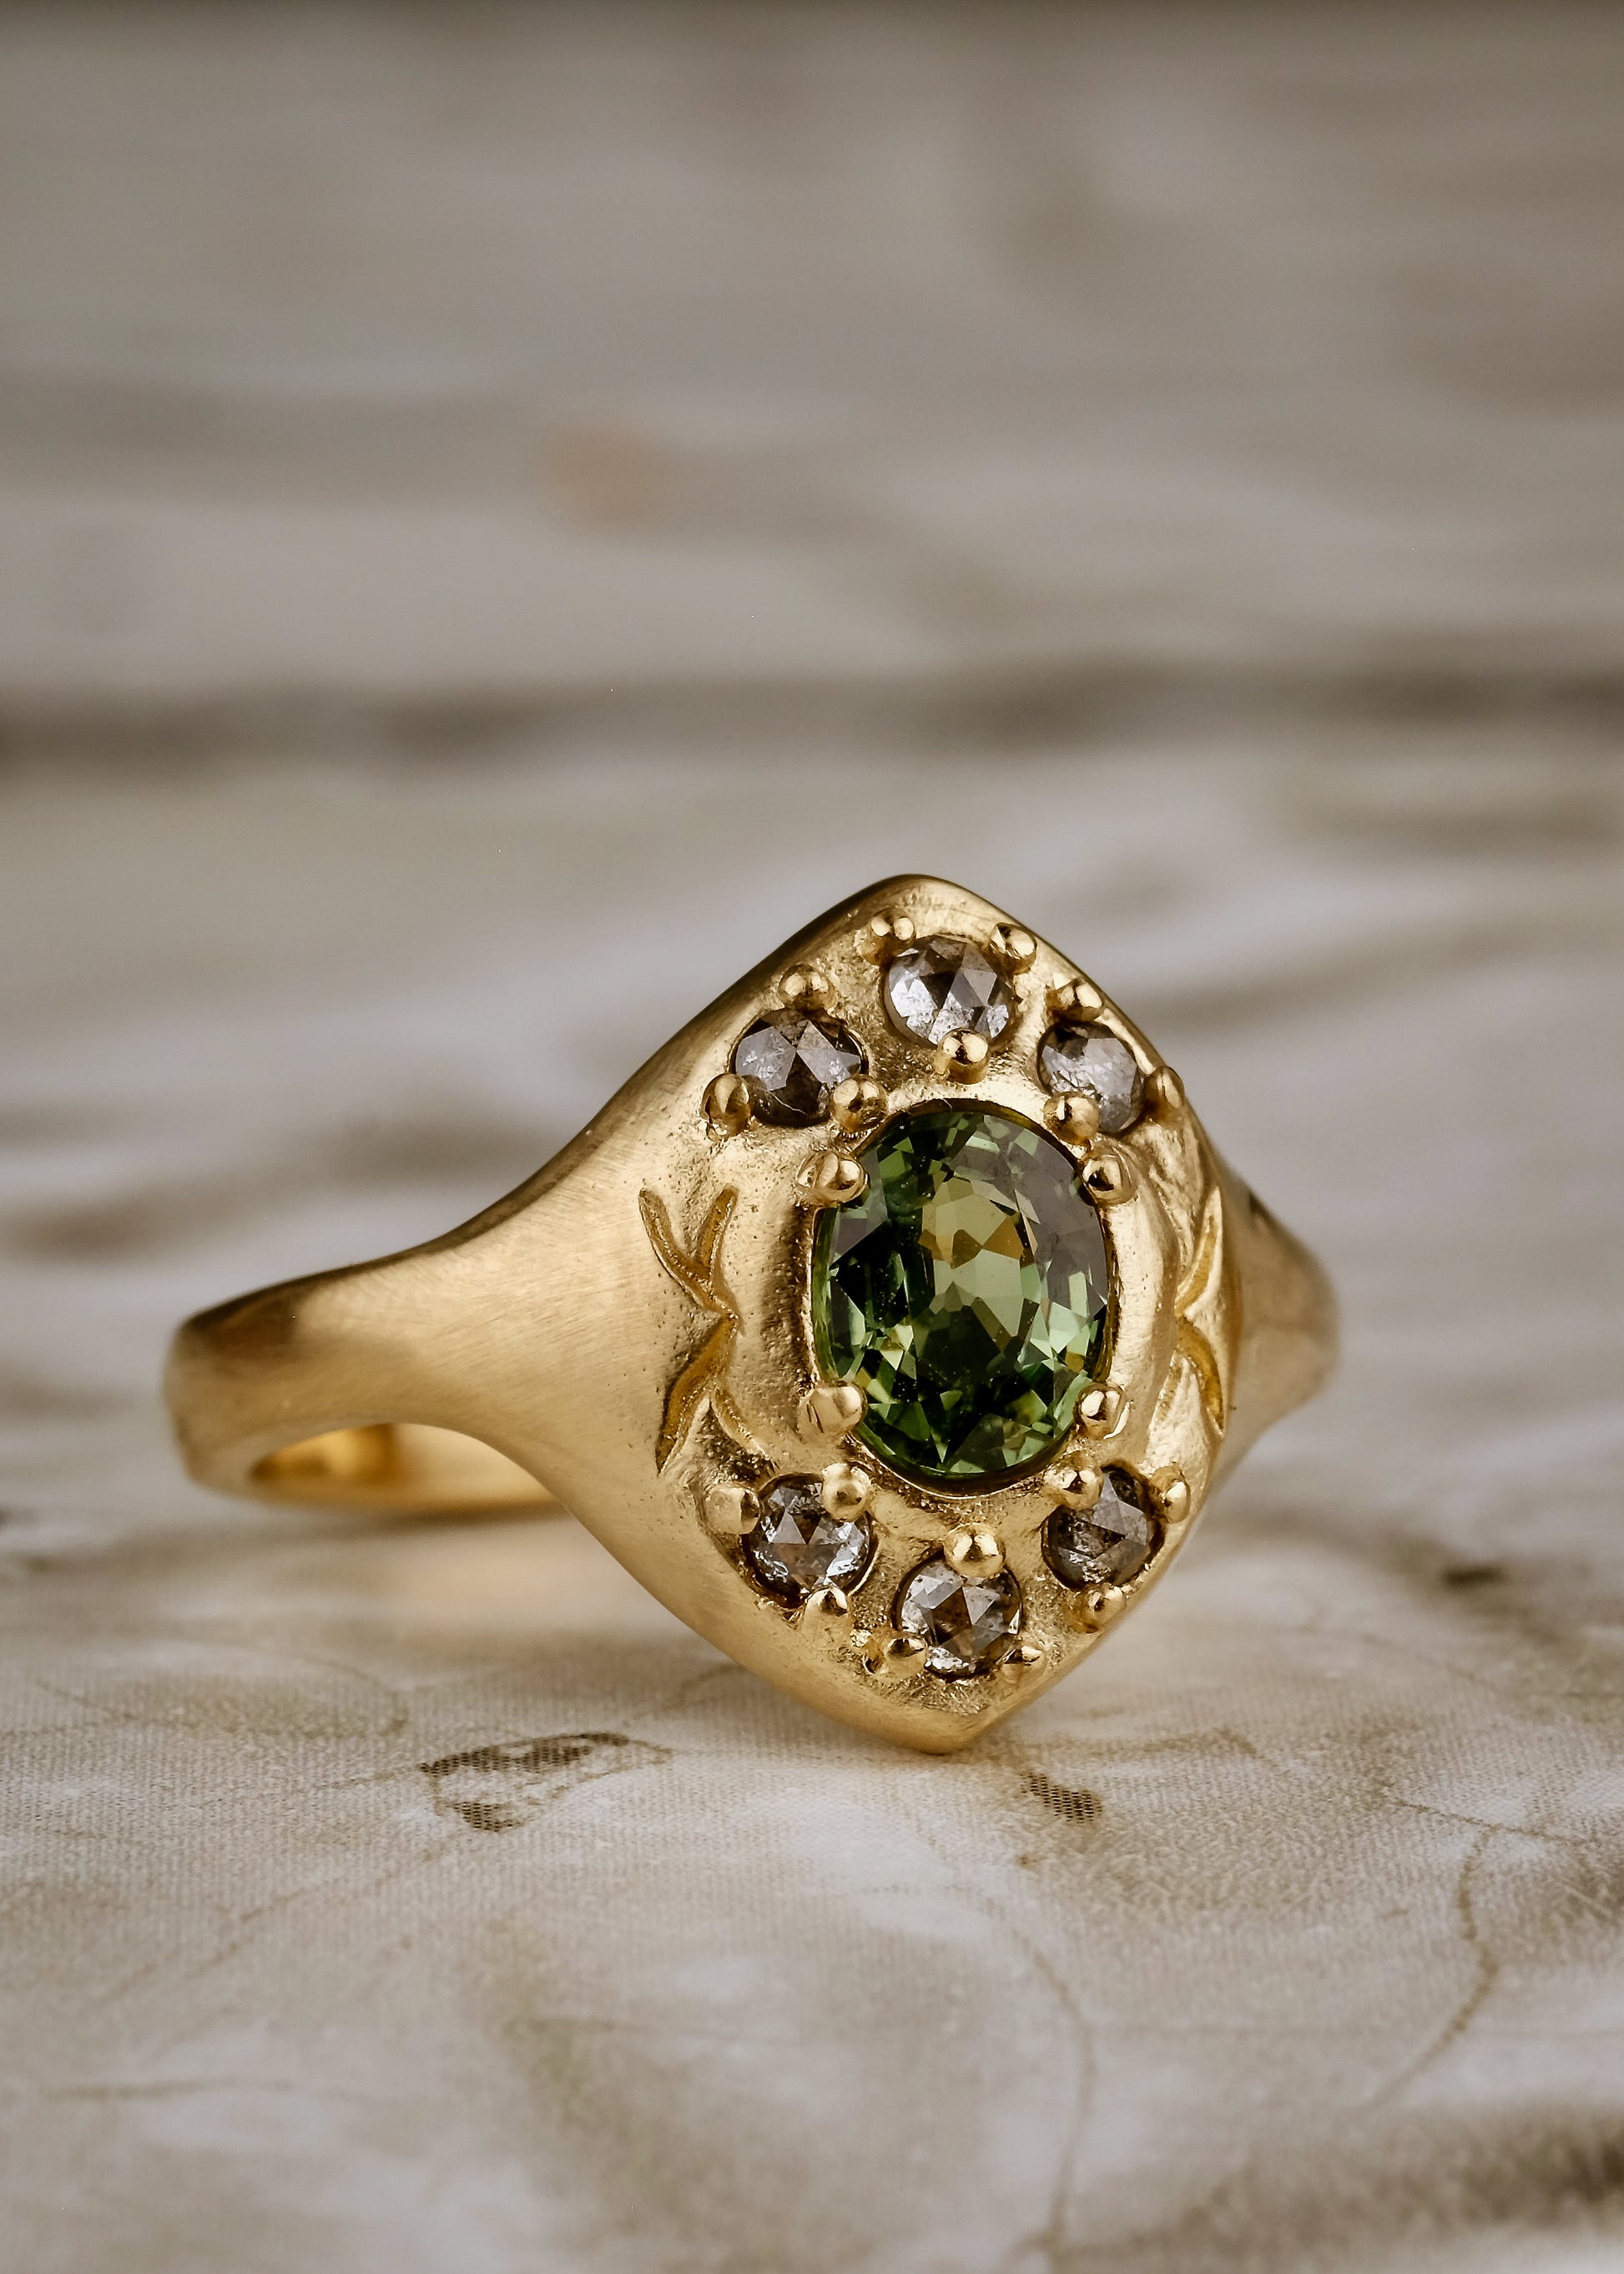 A resplendent portal to a bygone era, the Lucent ring borrows inspiration from the Gothic arches of a treasured riverside cathedral. Aligned to highlight the points of the arches, rose cut diamonds and a breathtaking green sapphire appear lit from within, like sunlight streaming through stained glass. A masterful, timeless piece of jewelry.